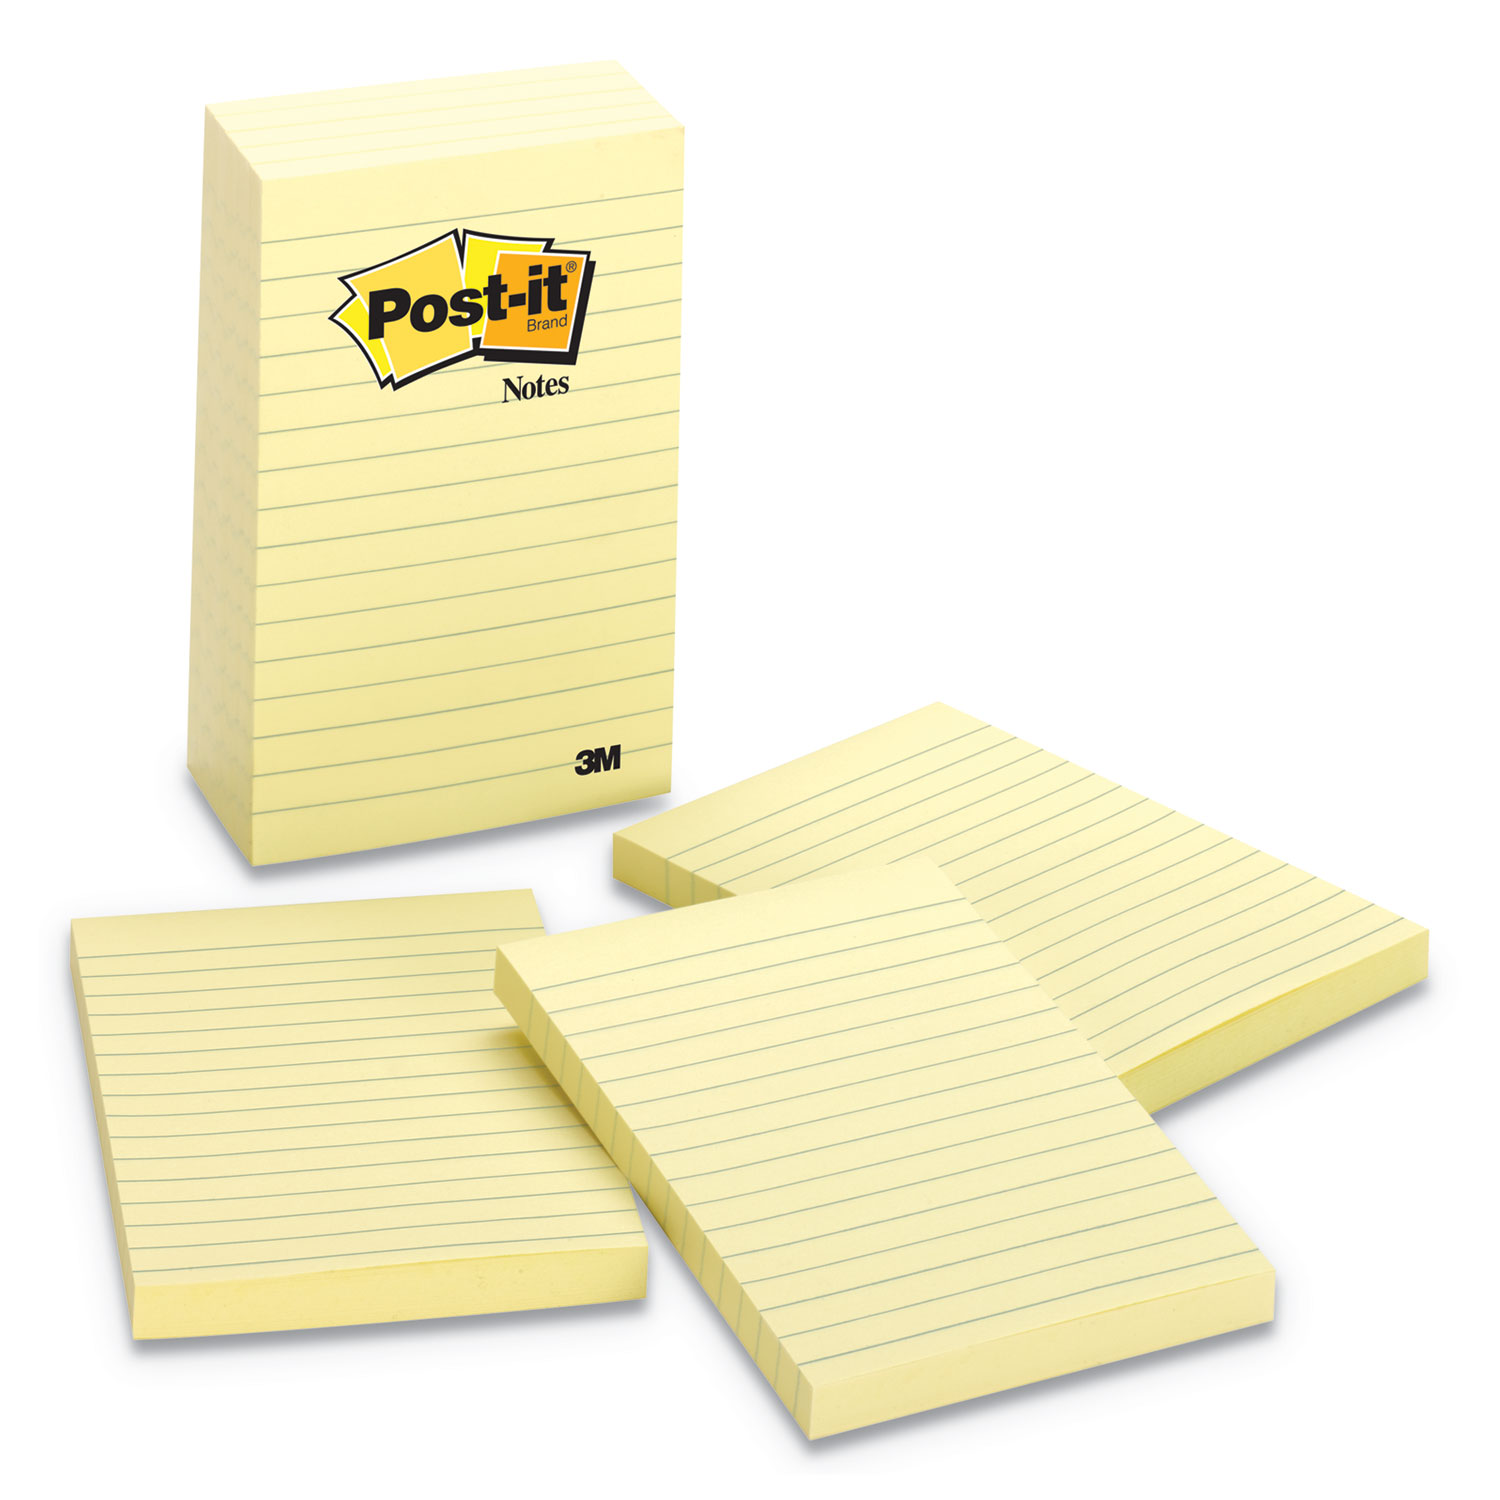  Post-it Notes 660-5PK Original Pads in Canary Yellow, Lined, 4 x 6, 100-Sheet, 5/Pack (MMM6605PK) 